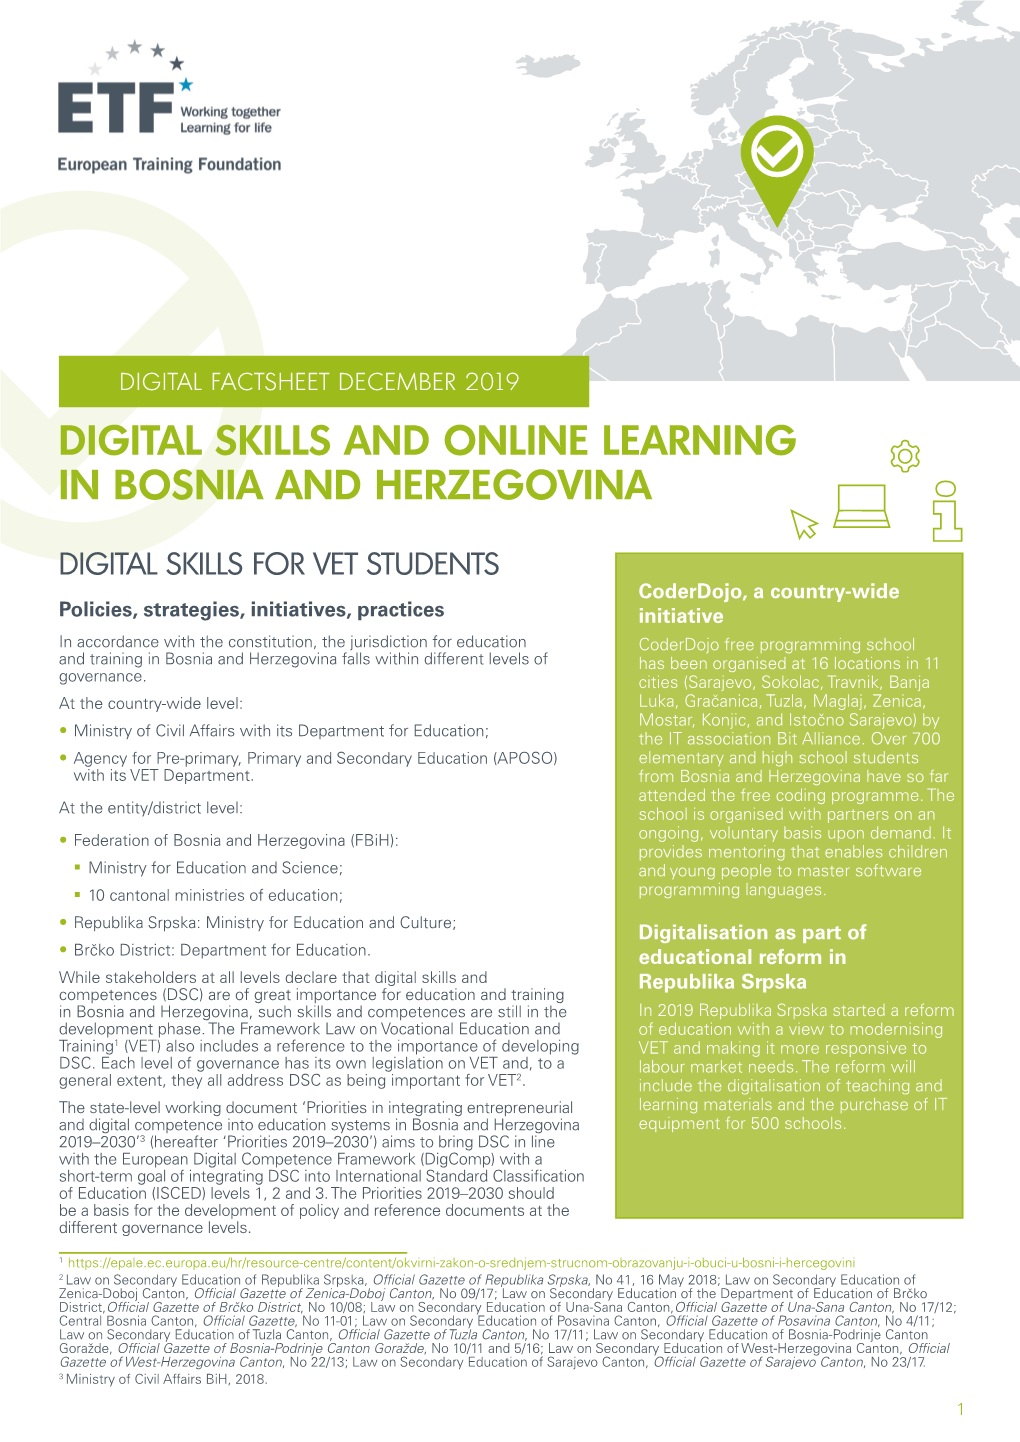 Digital Skills and Online Learning in Bosnia and Herzegovina